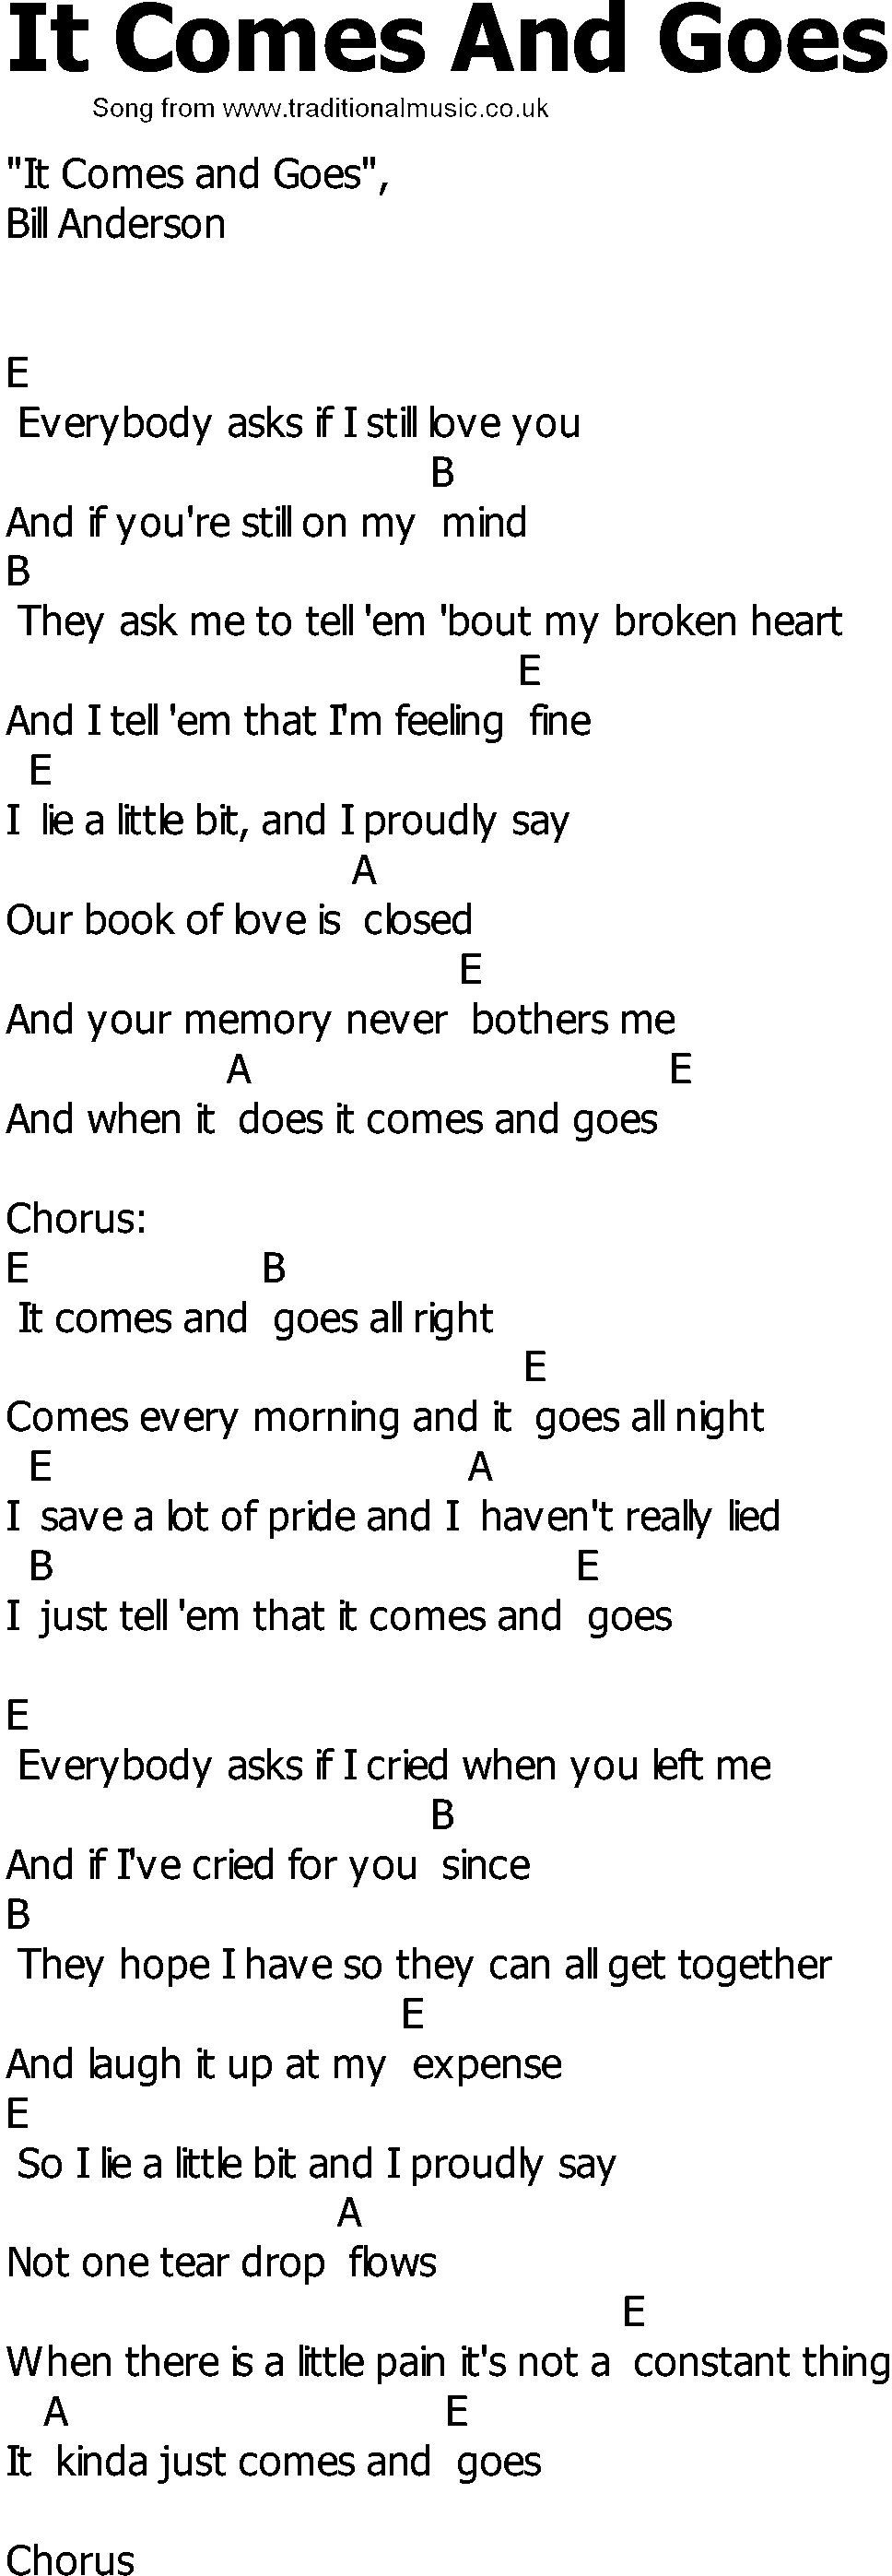 Old Country song lyrics with chords - It Comes And Goes